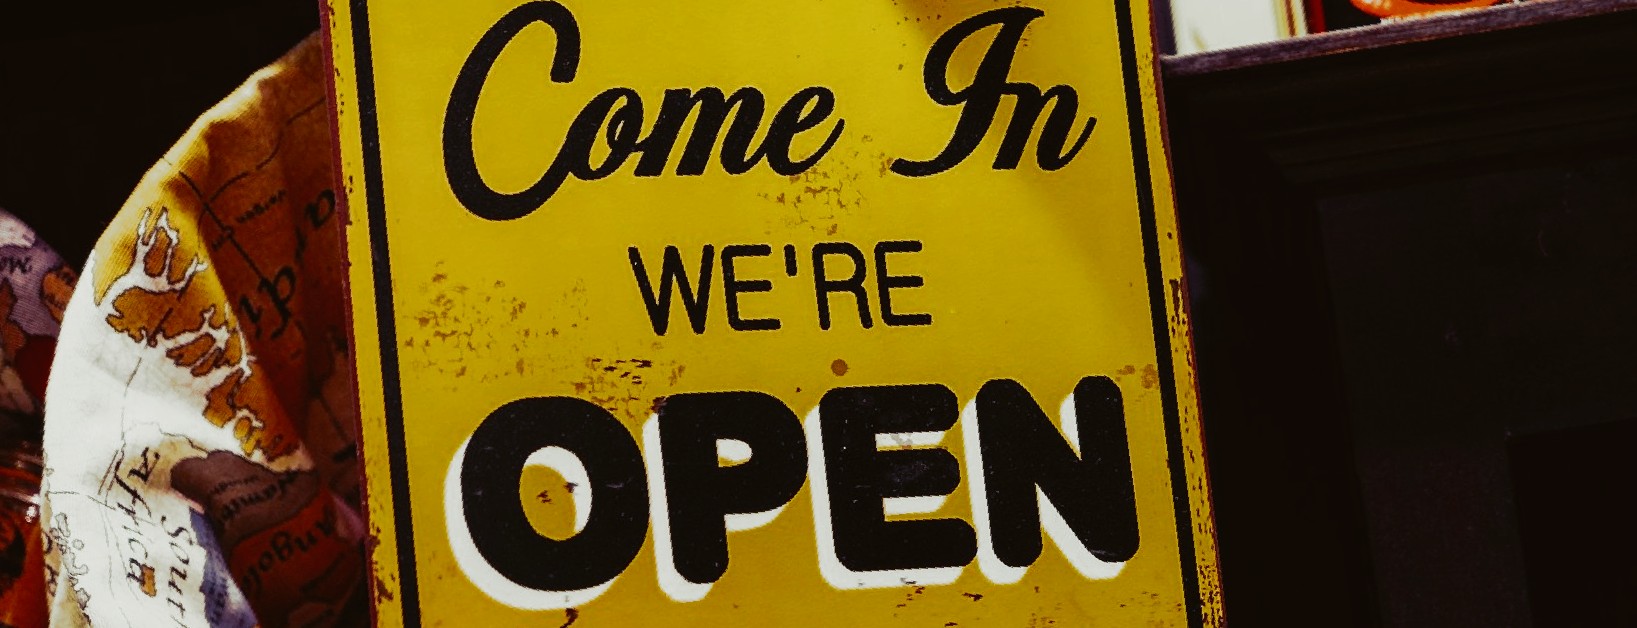 Image of sign stating “Come In We’re open